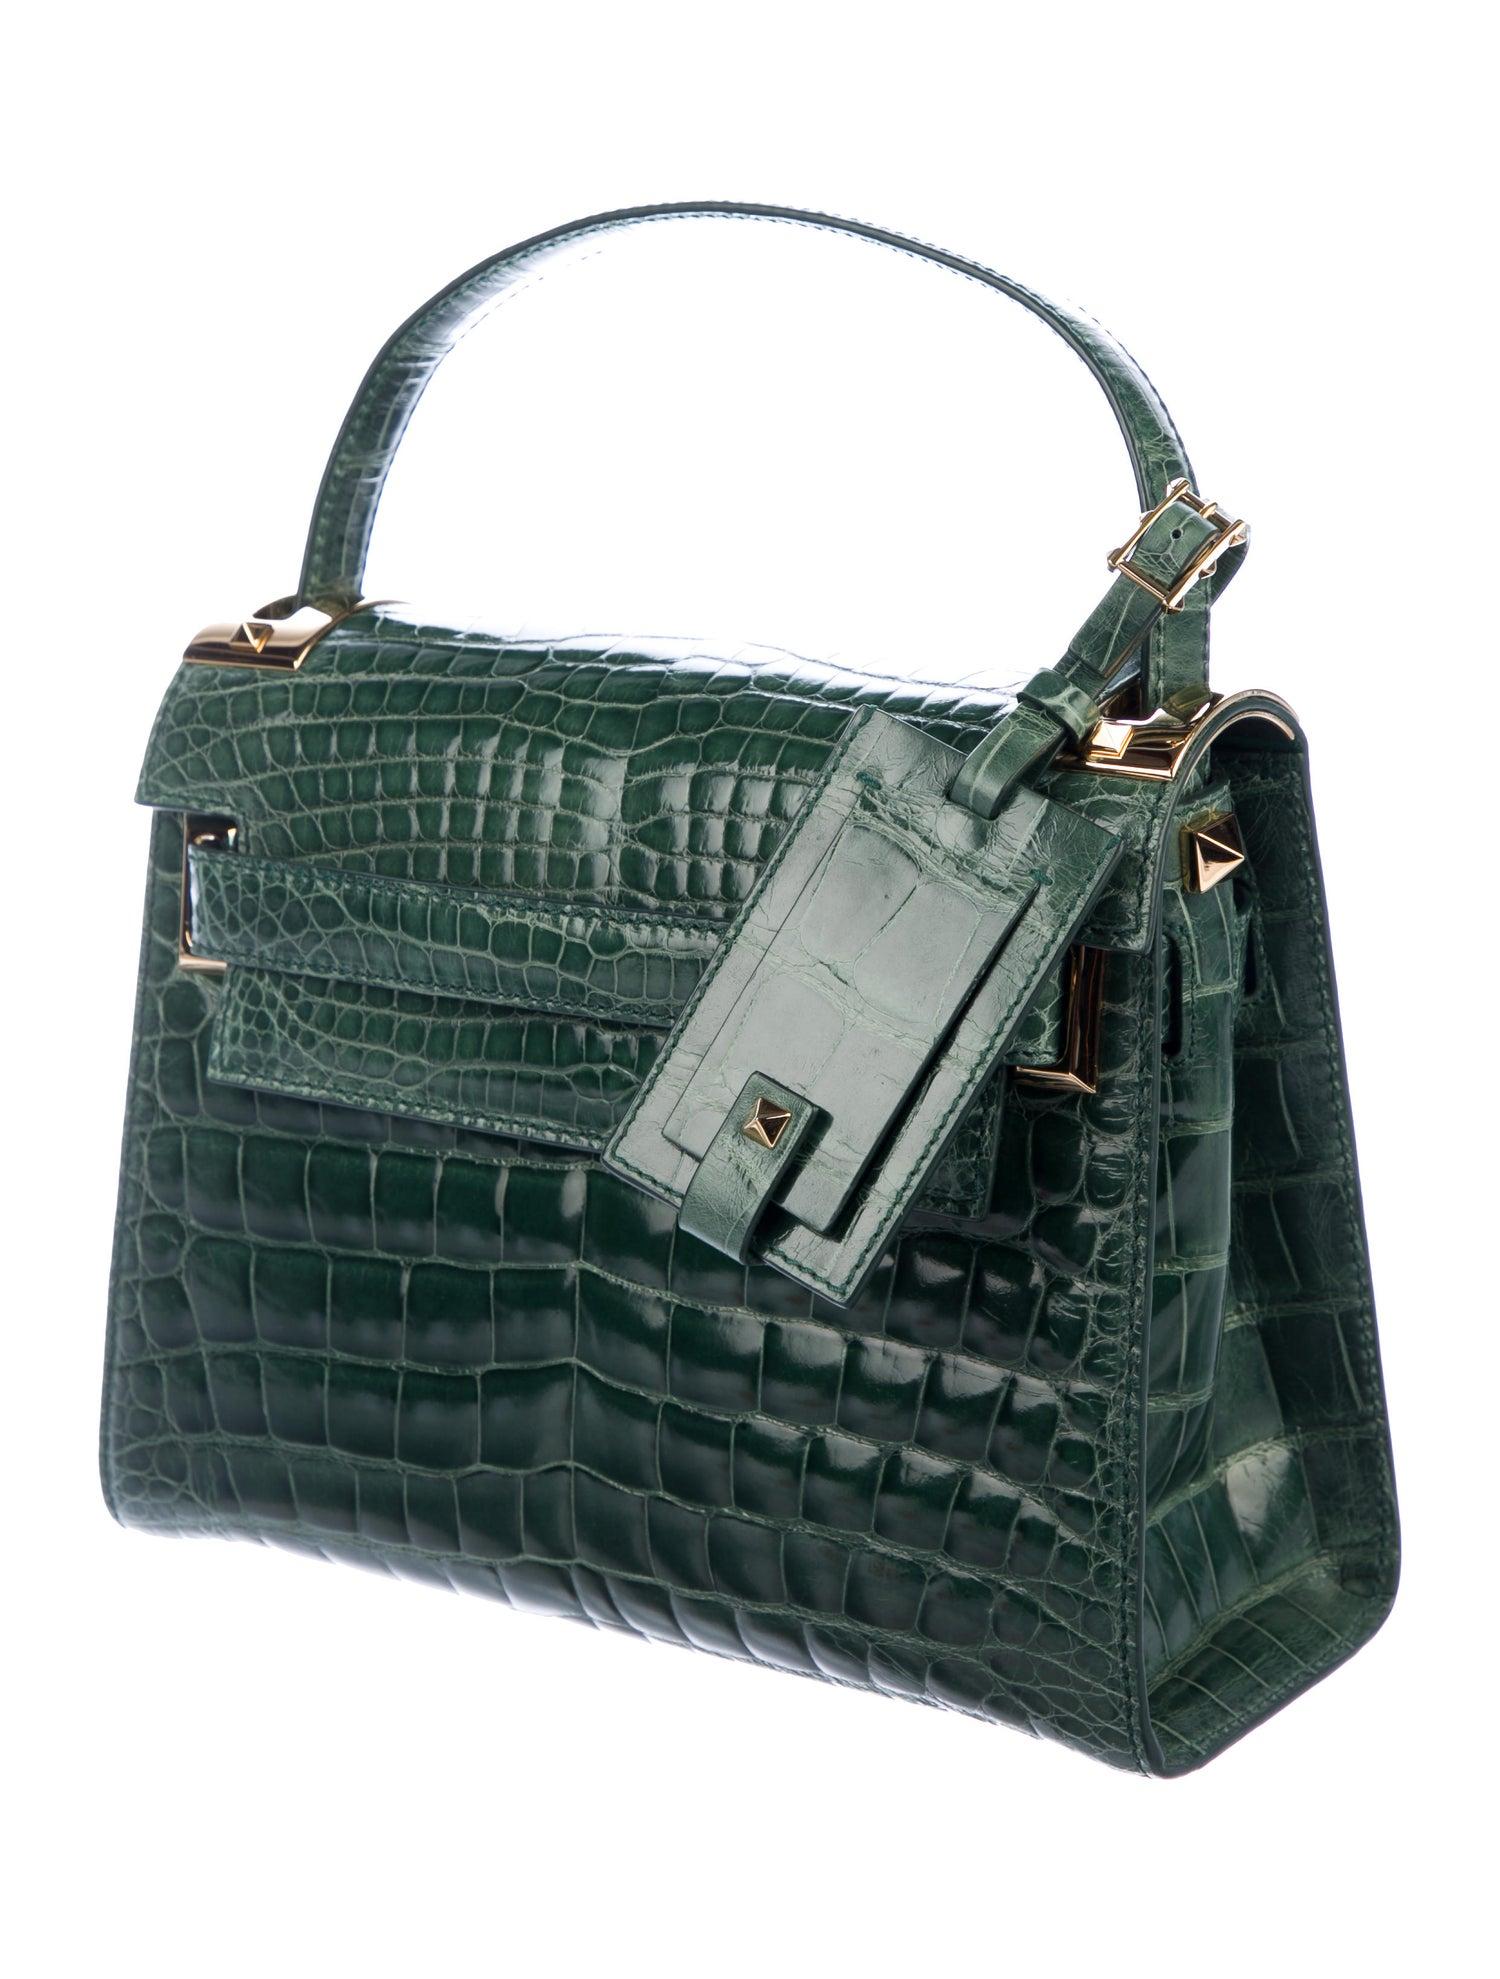 Valentino NEW Green Alligator Exotic Leather Gold Stud Top Handle Kelly Style Satchel Shoulder Bag

Alligator 
Gold-tone hardware
Suede lining
Magnetic flap closure
Made in Italy
Handle drop 4